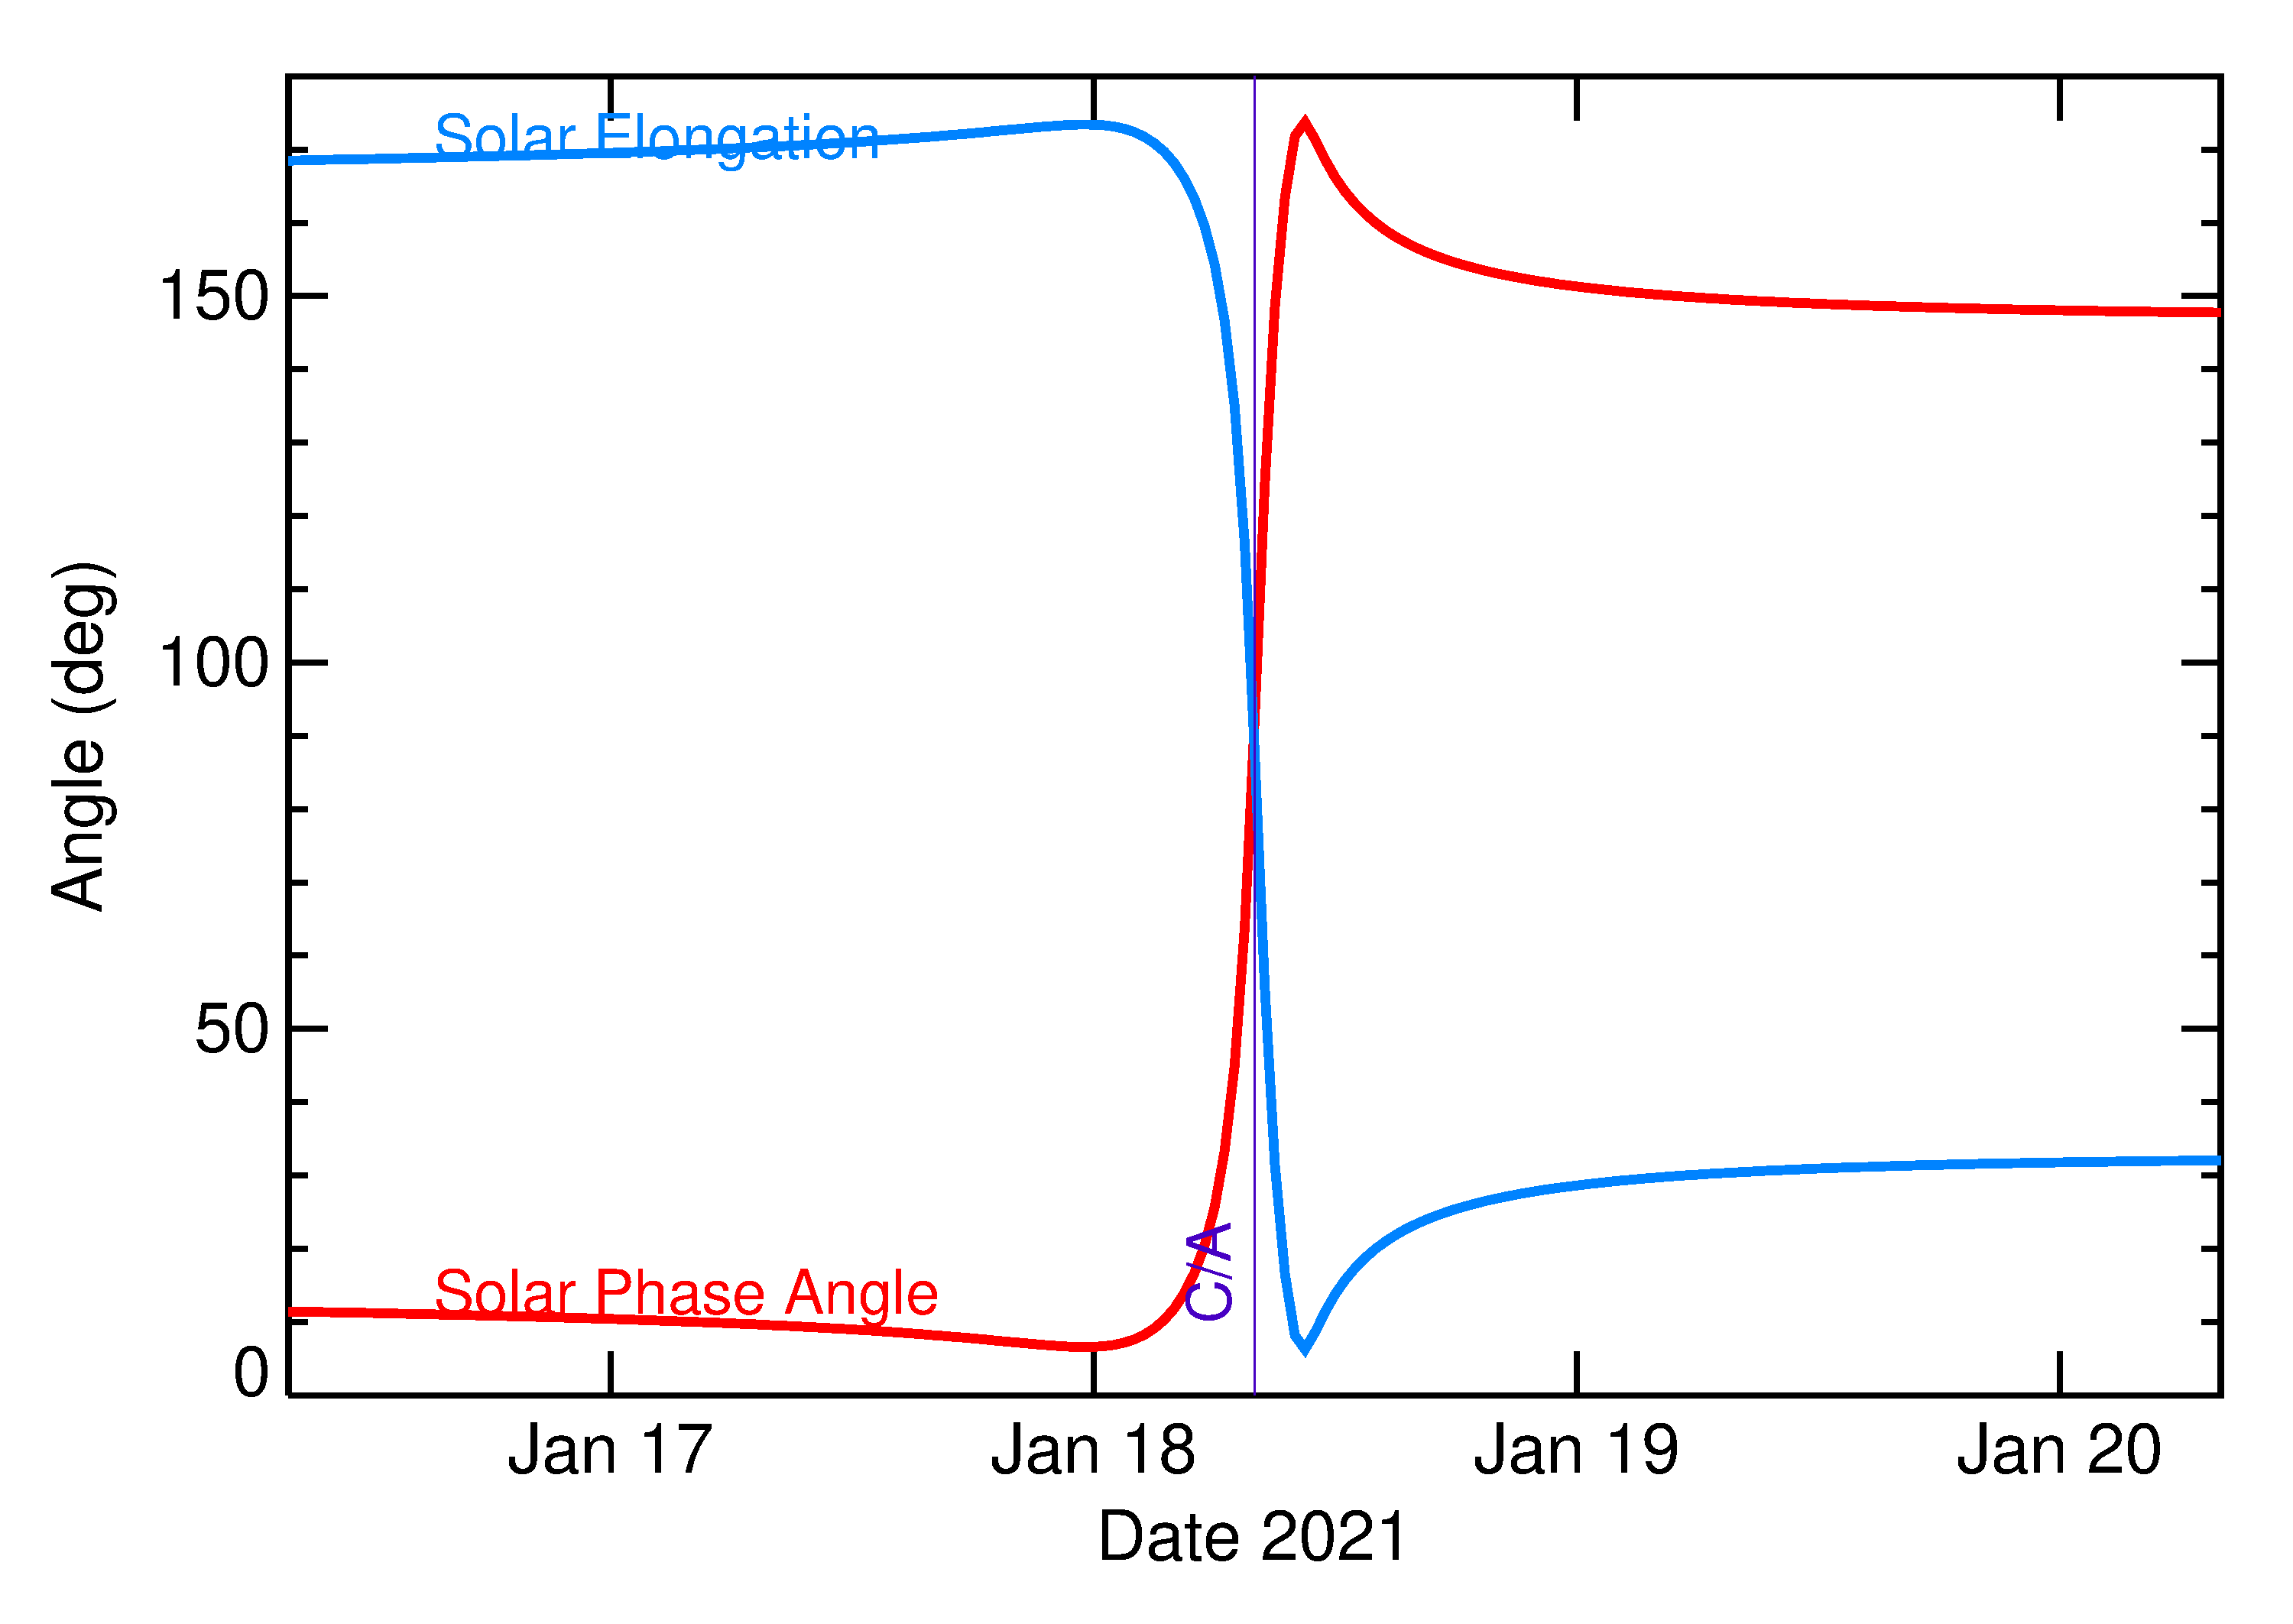 Solar Elongation and Solar Phase Angle of 2021 BO in the days around closest approach